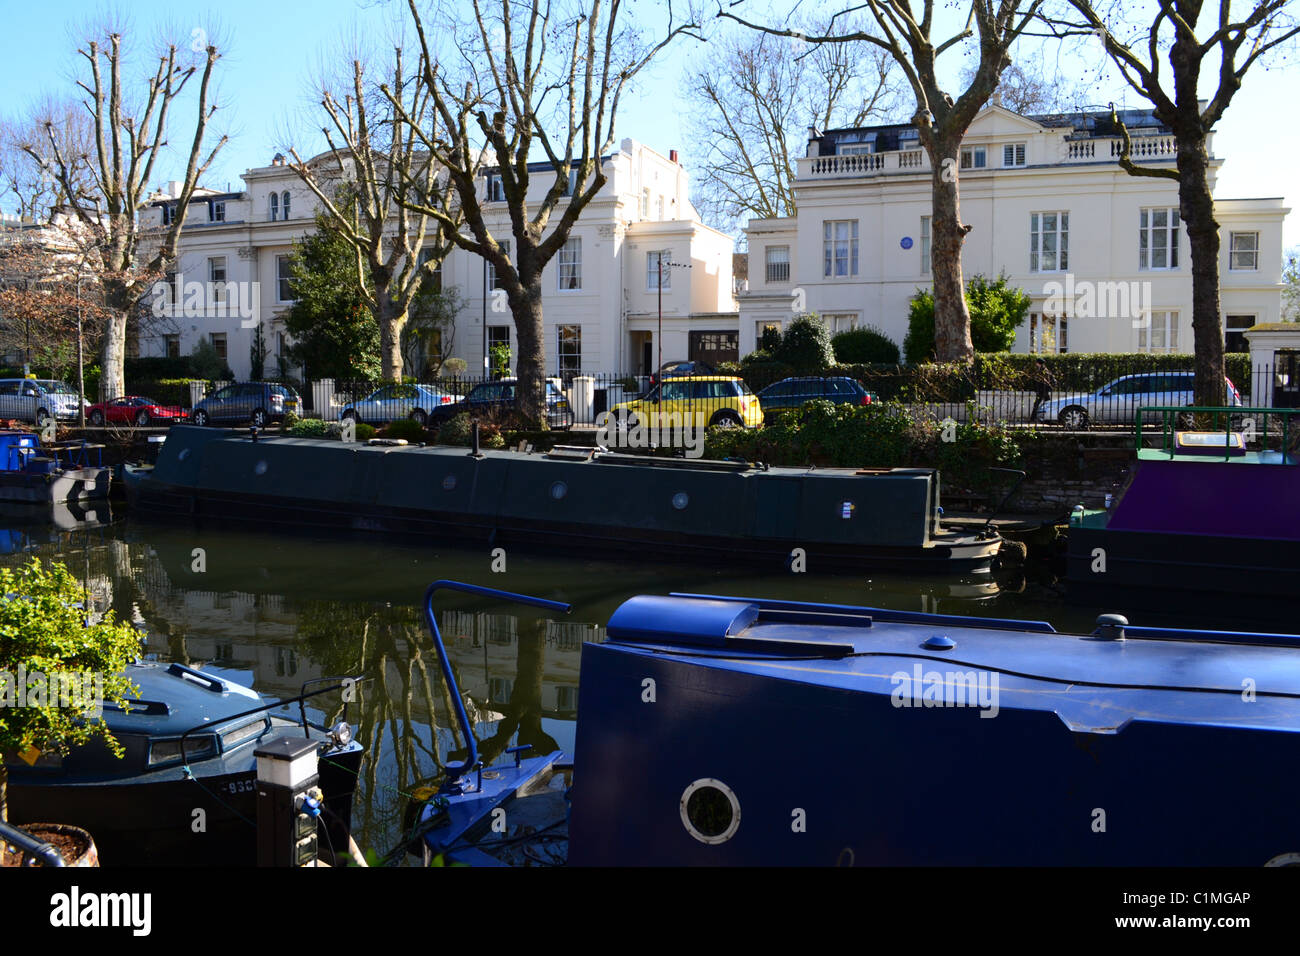 Colourful boats in Little Venice, Regent's Canal, London ARTIFEX LUCIS Stock Photo